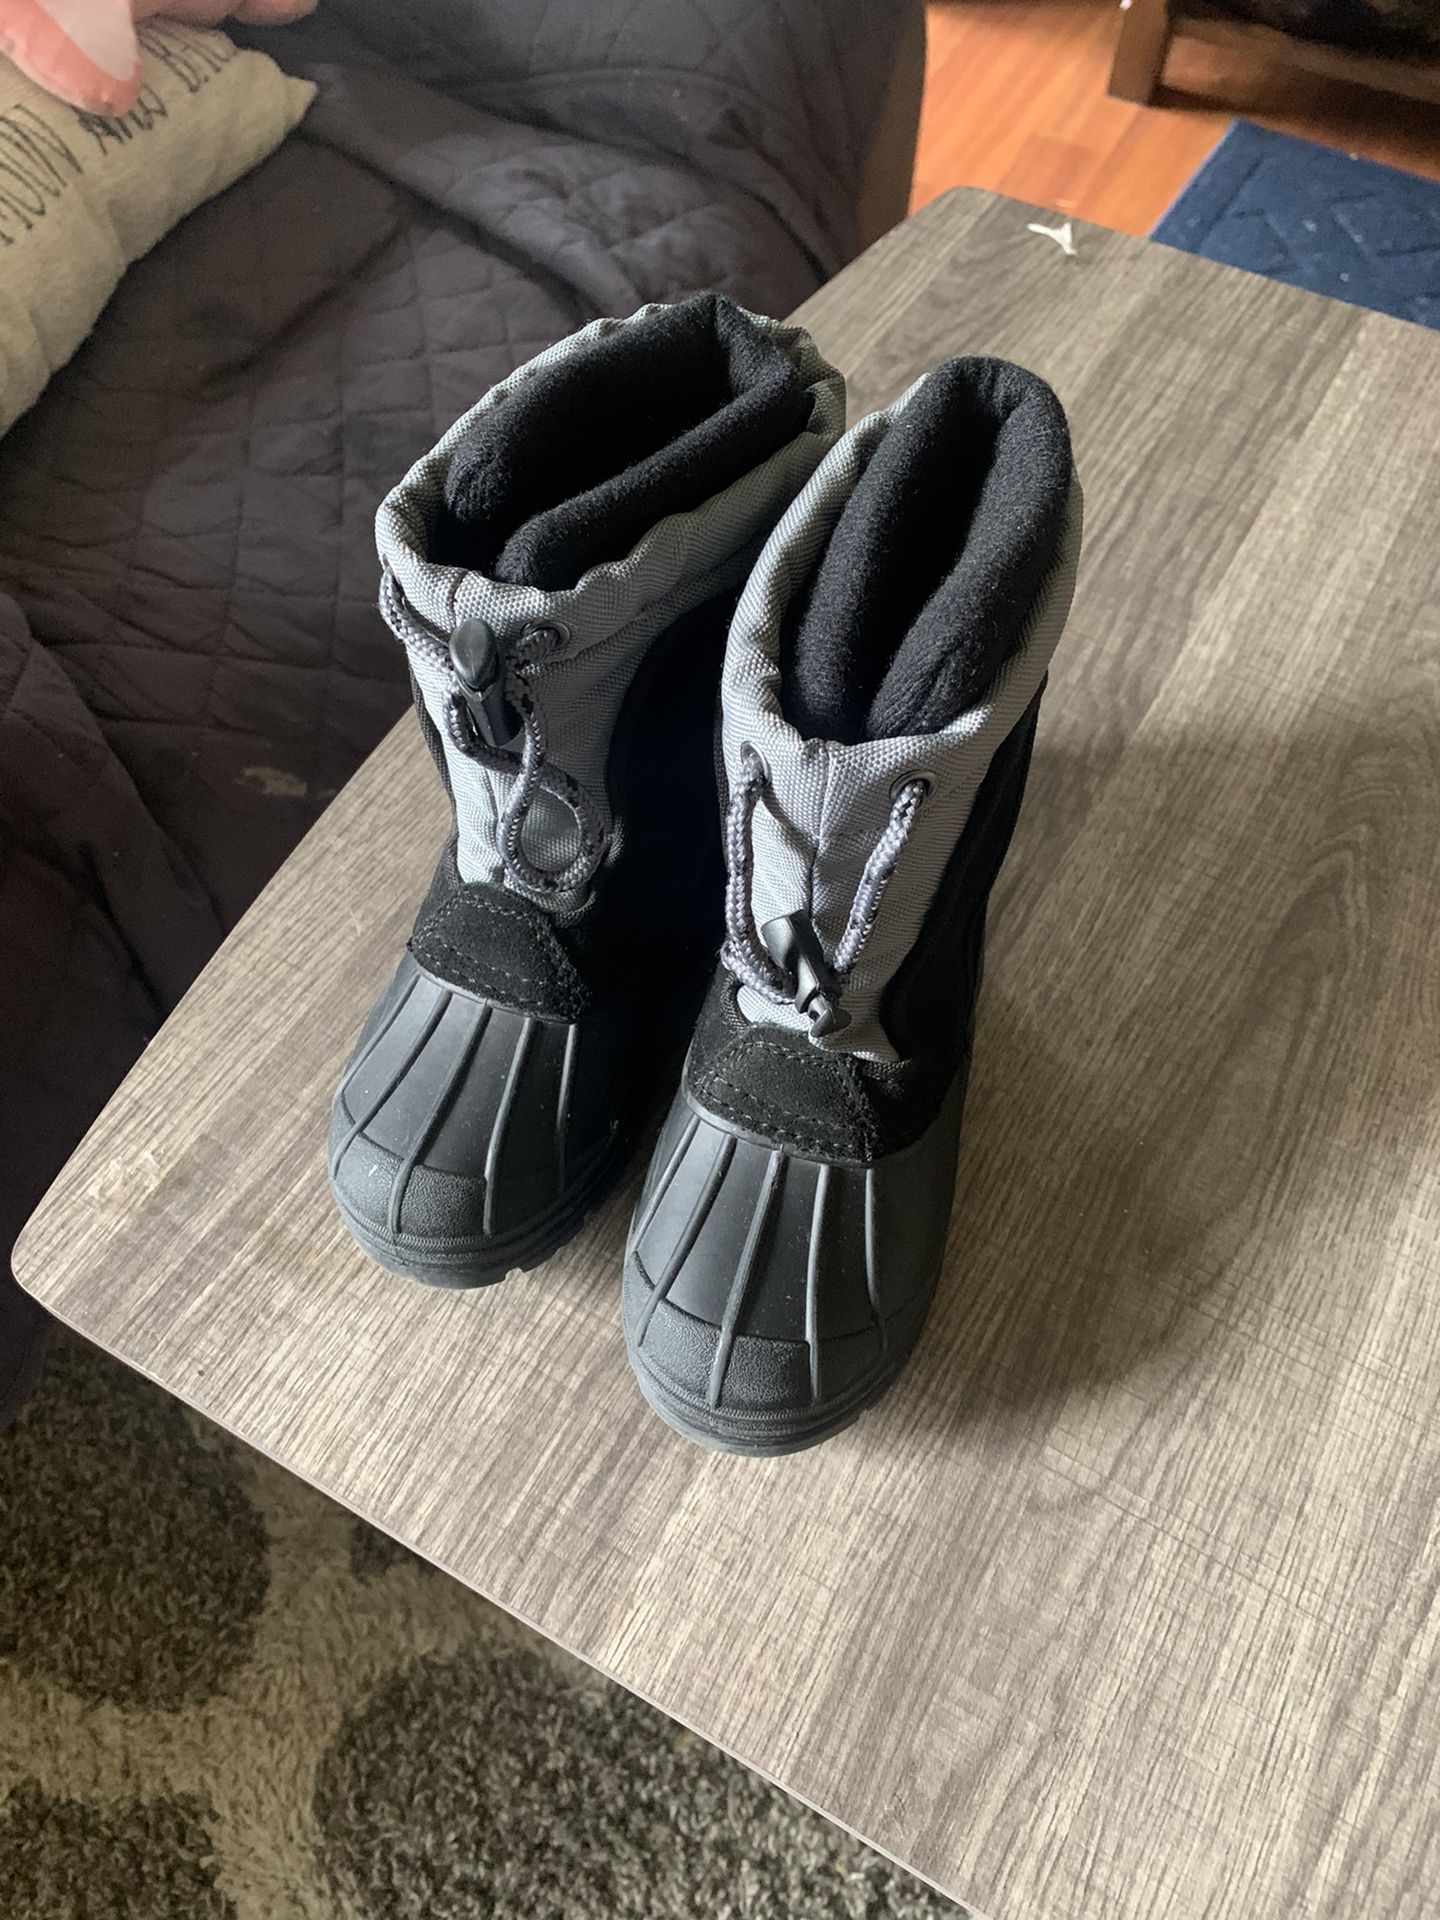 Boys Toddler Snow/Winter Boots Size 8T